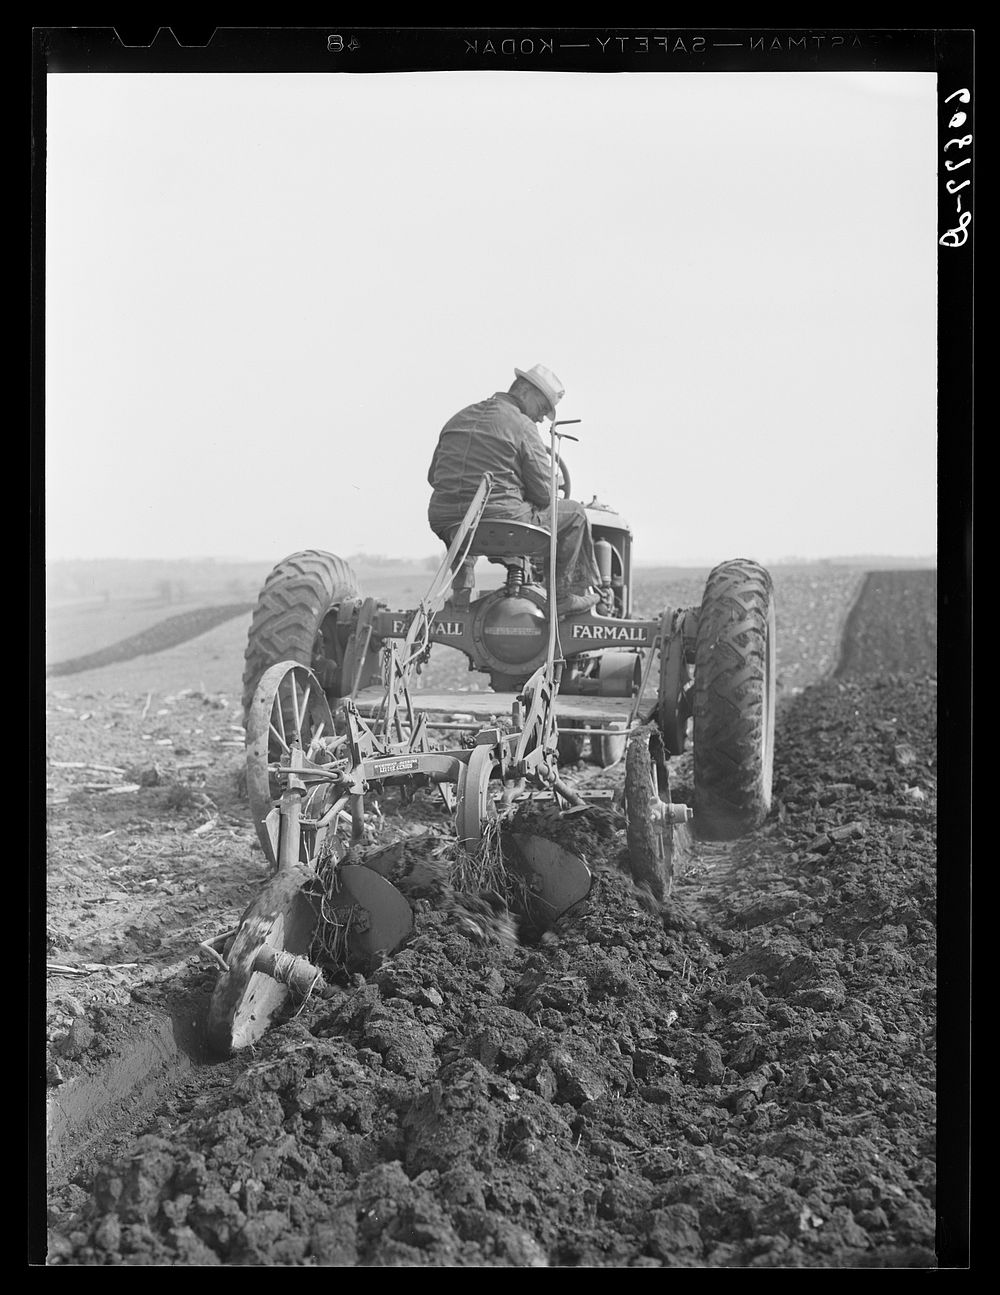 Plowing with tractor. Jasper County, Iowa. Sourced from the Library of Congress.